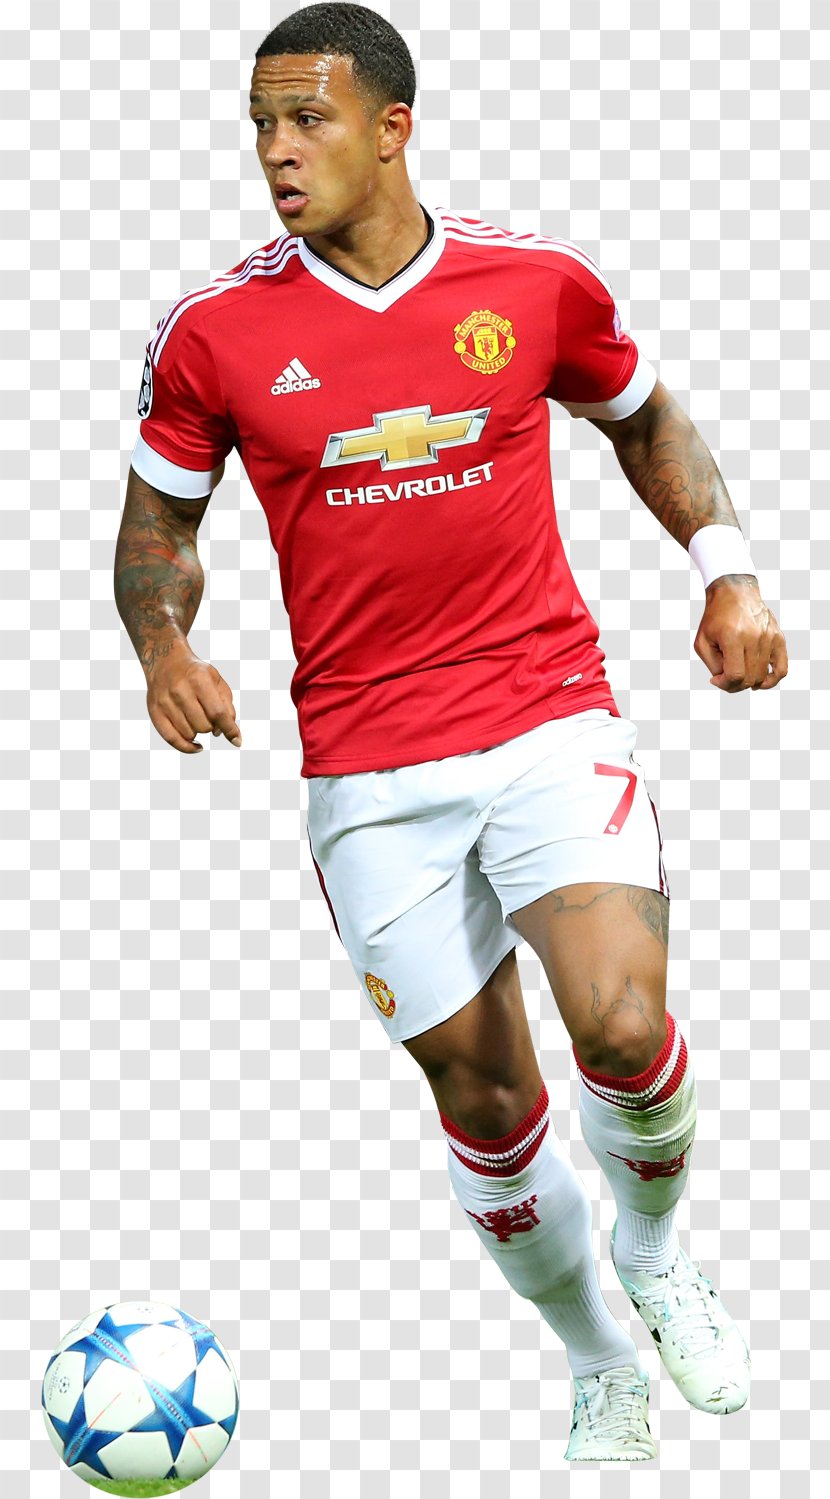 Anthony Martial Manchester United F.C. Jersey Football Player - Shorts Transparent PNG